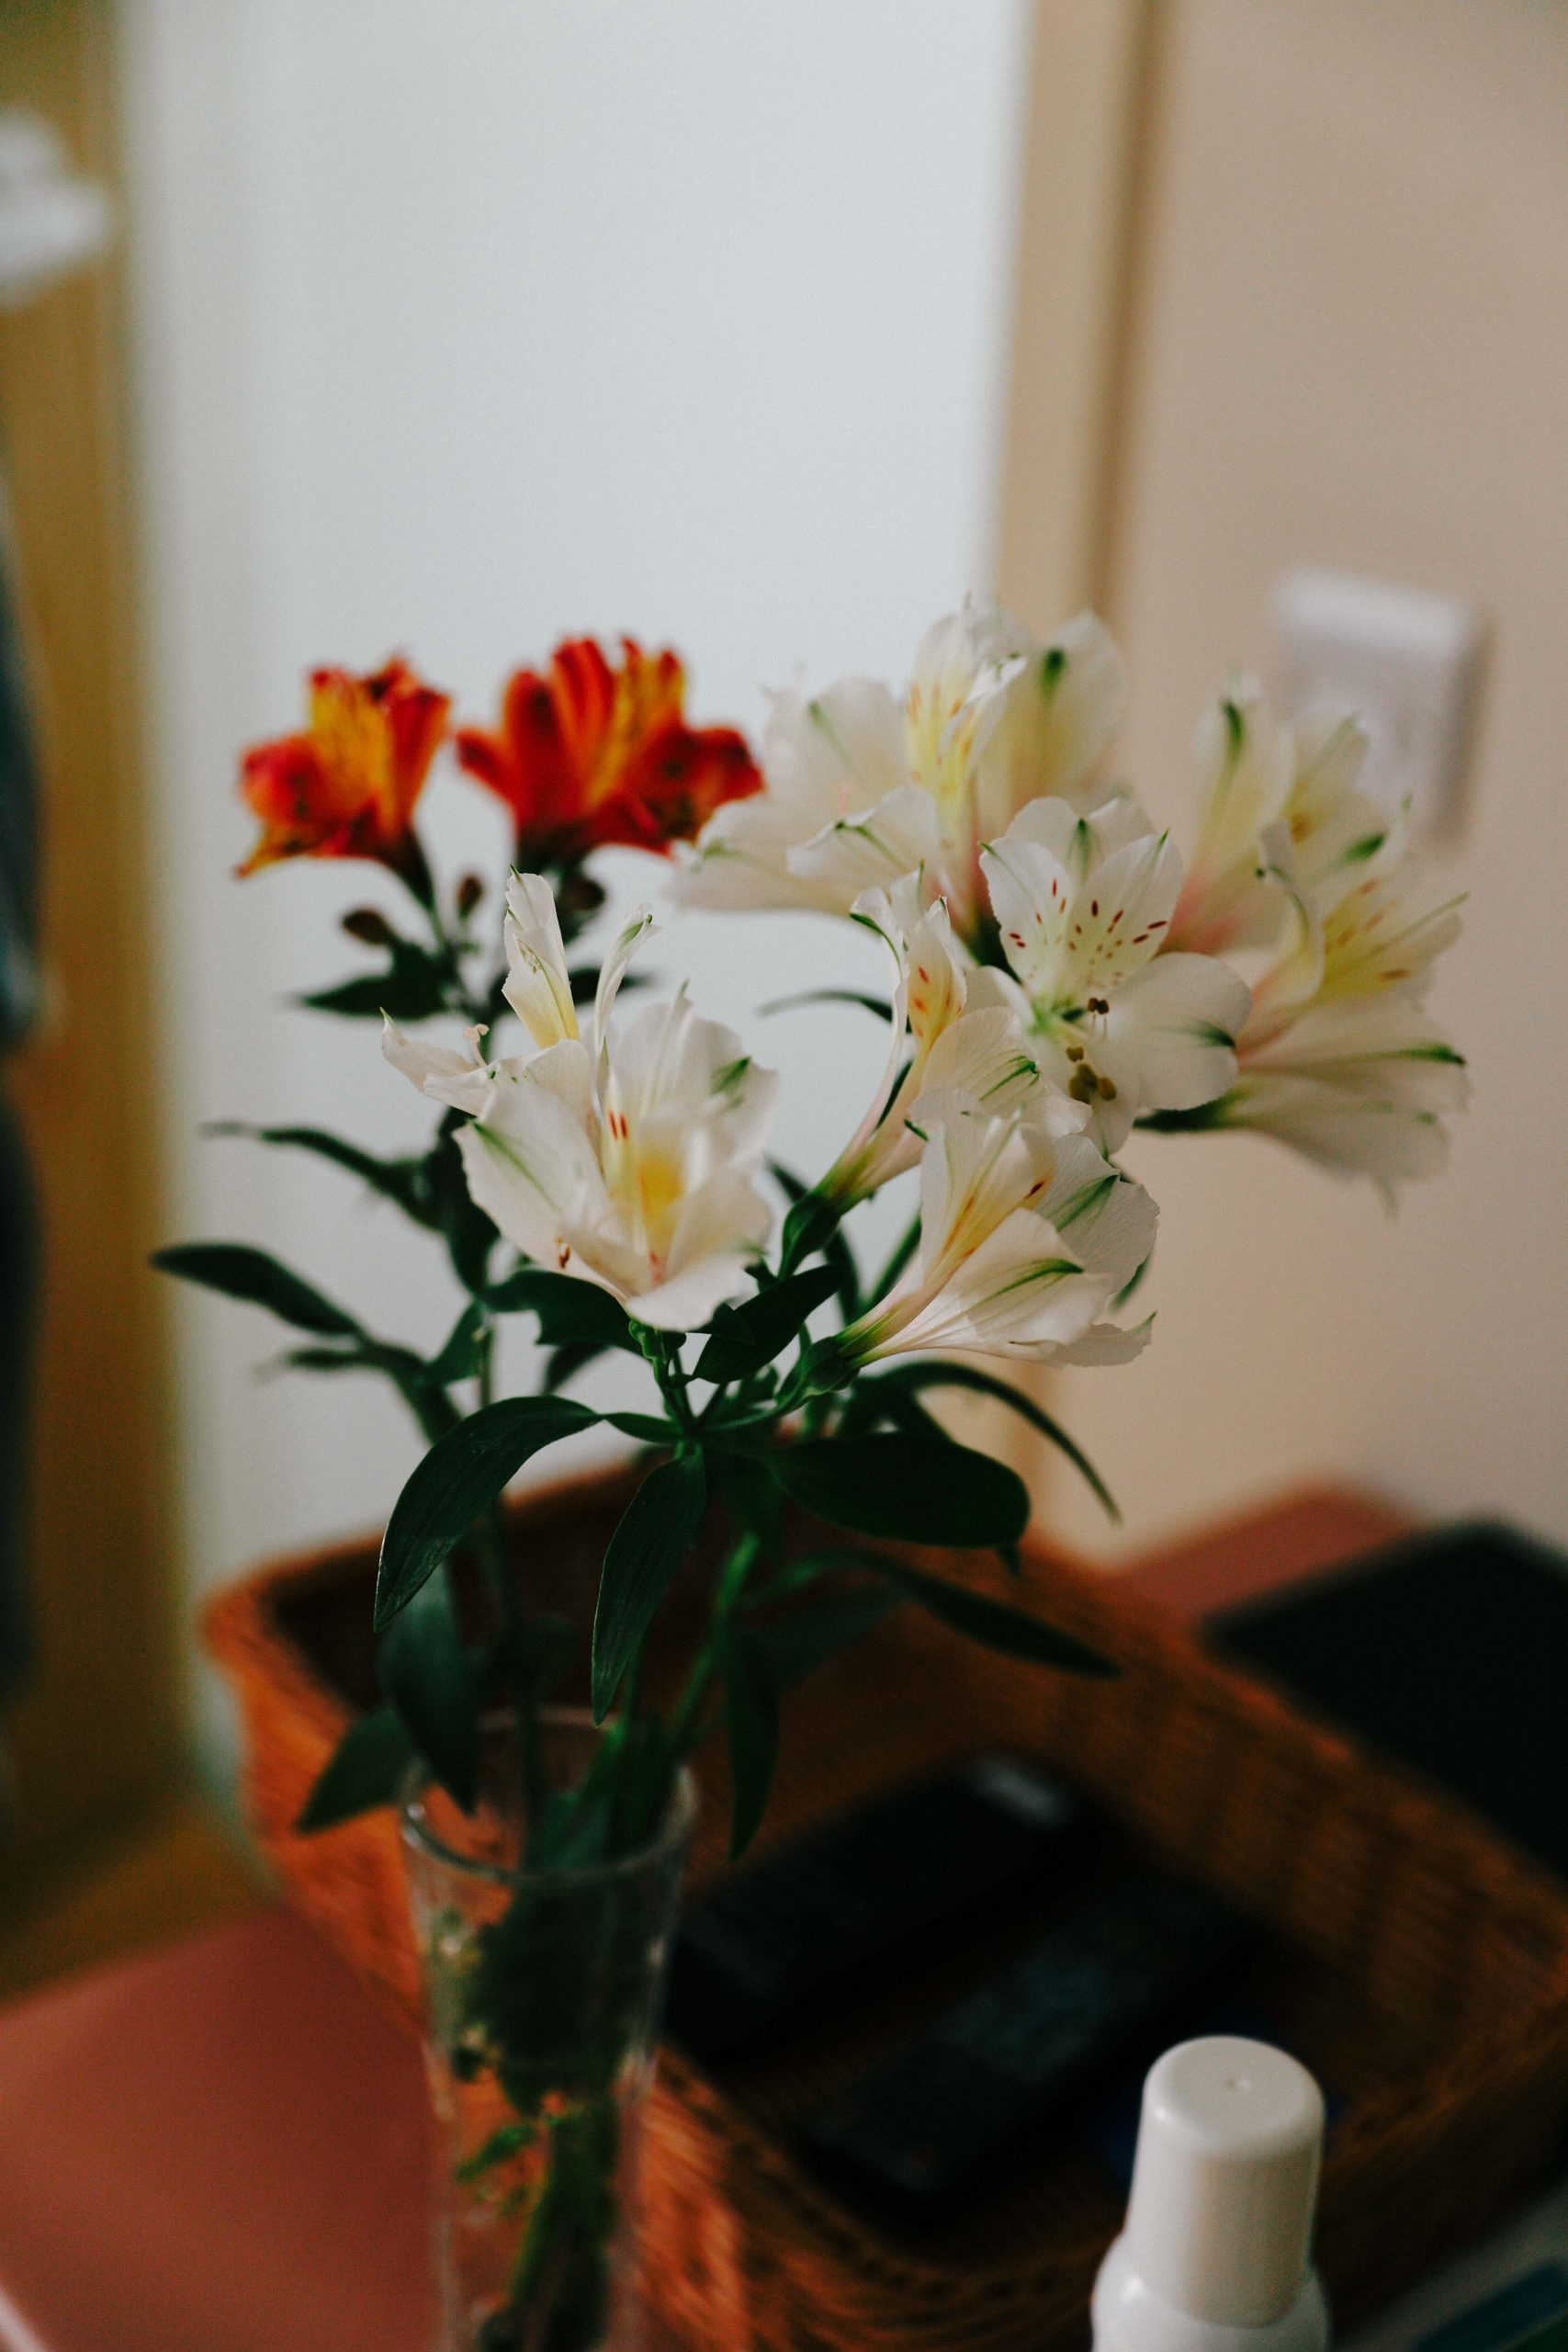 Greg's favourite flowers in his room.